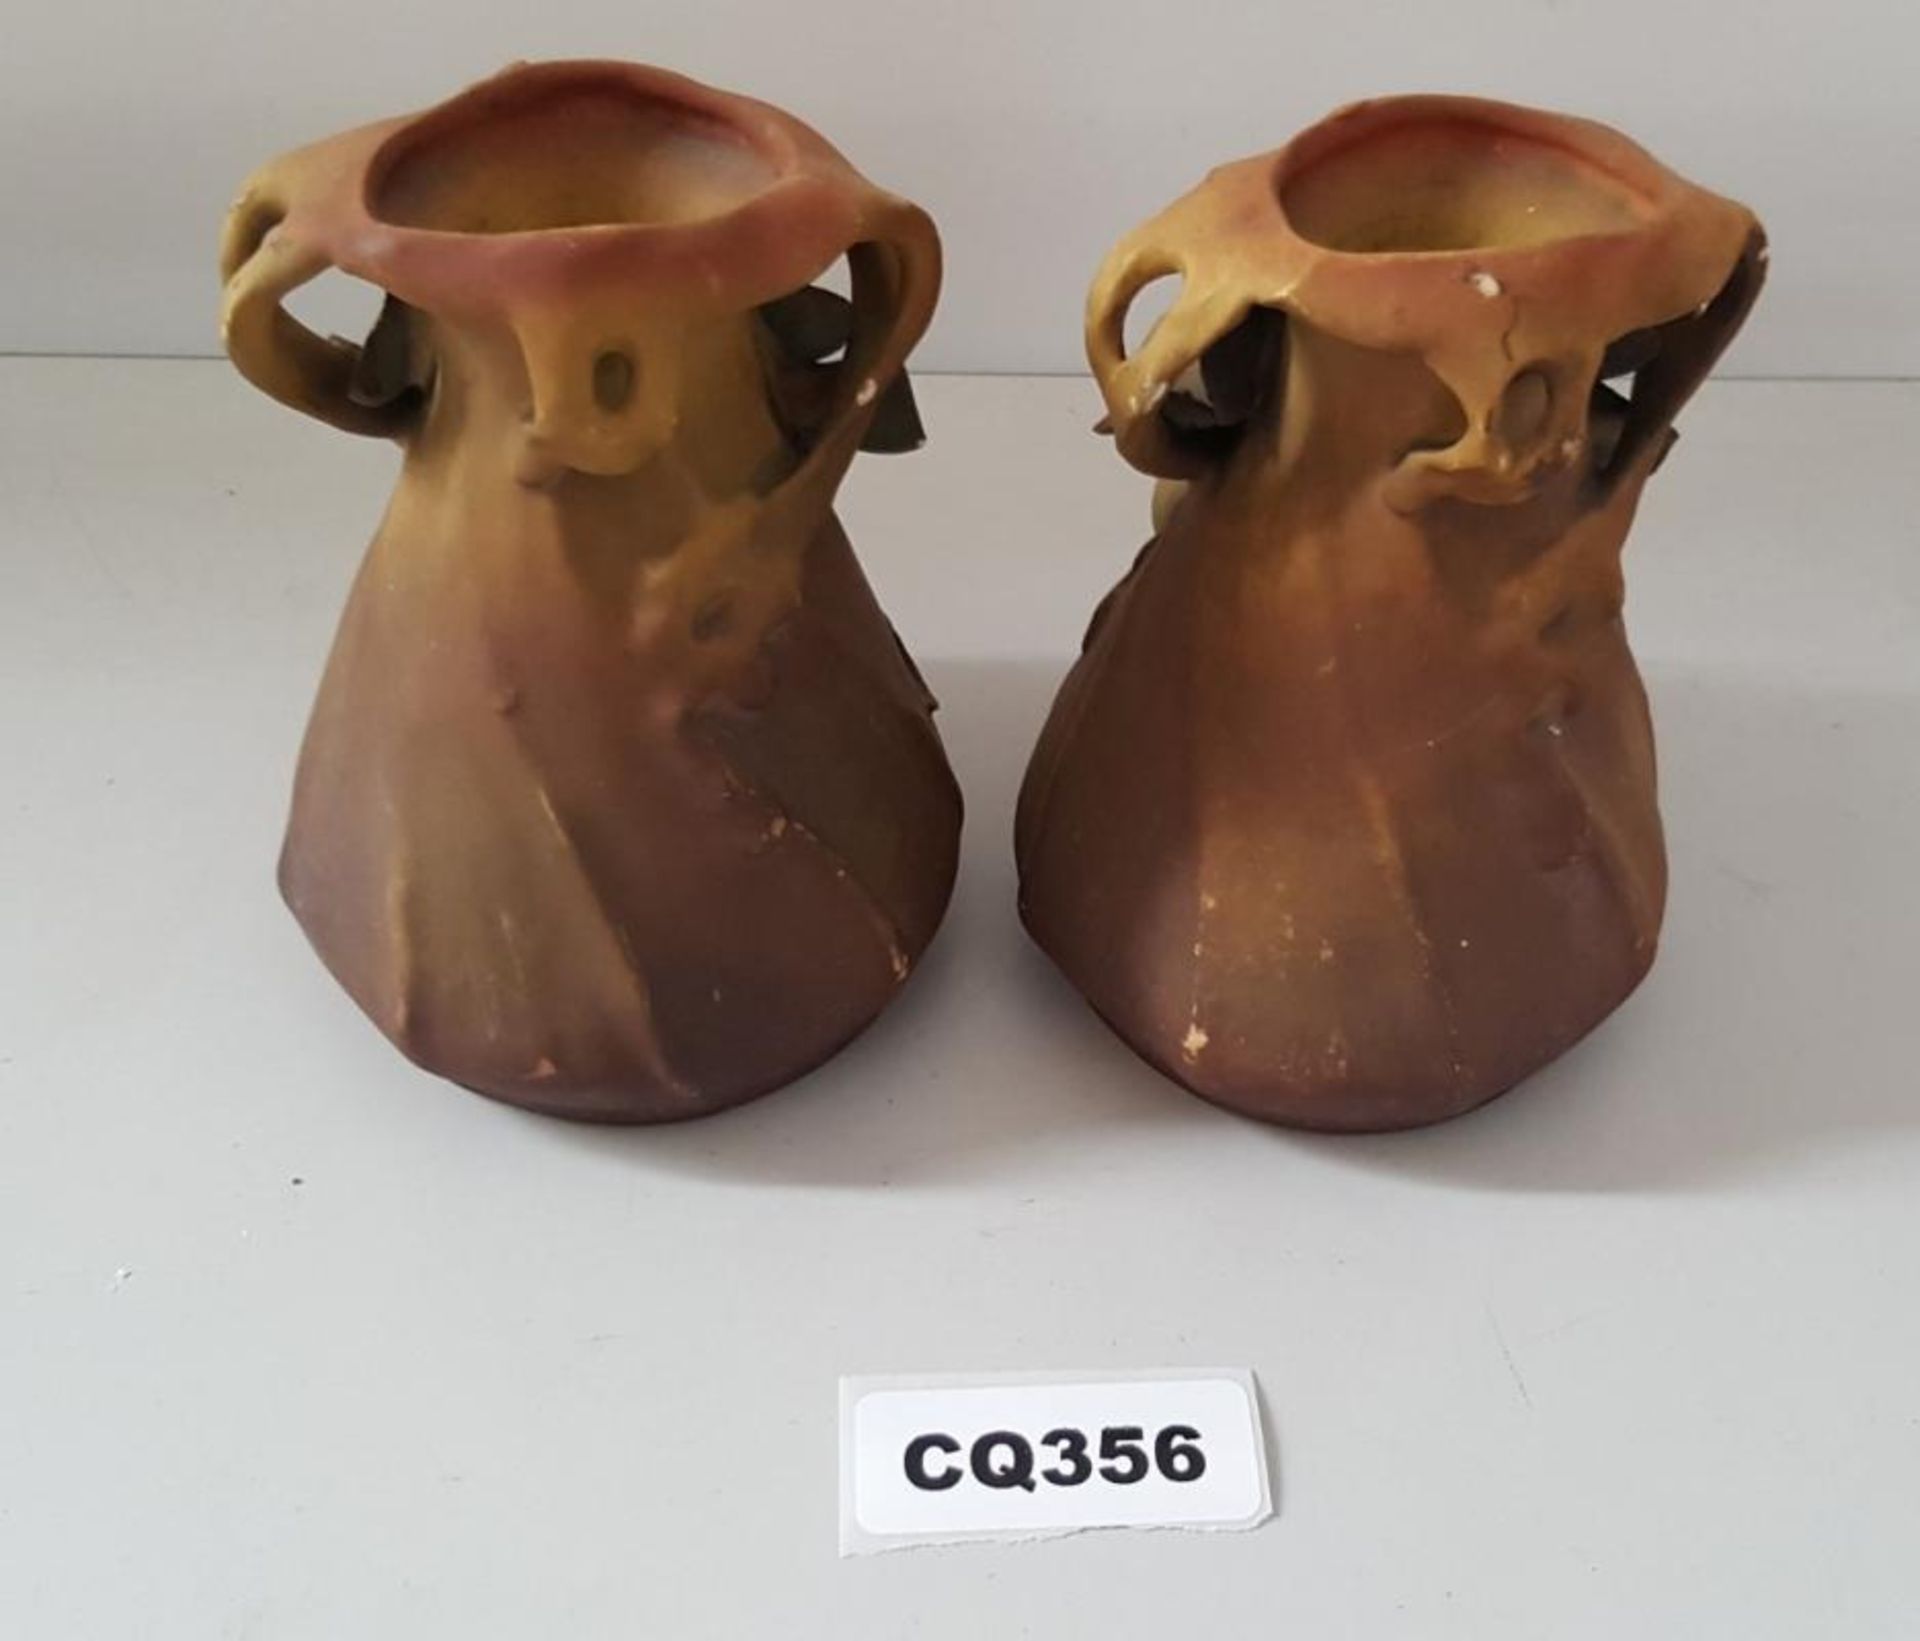 1 x A Pair Of Small Vases With Grape Design - Ref CQ356 E - Dimensions: H11/L9CM - CL334 - Location - Image 2 of 3